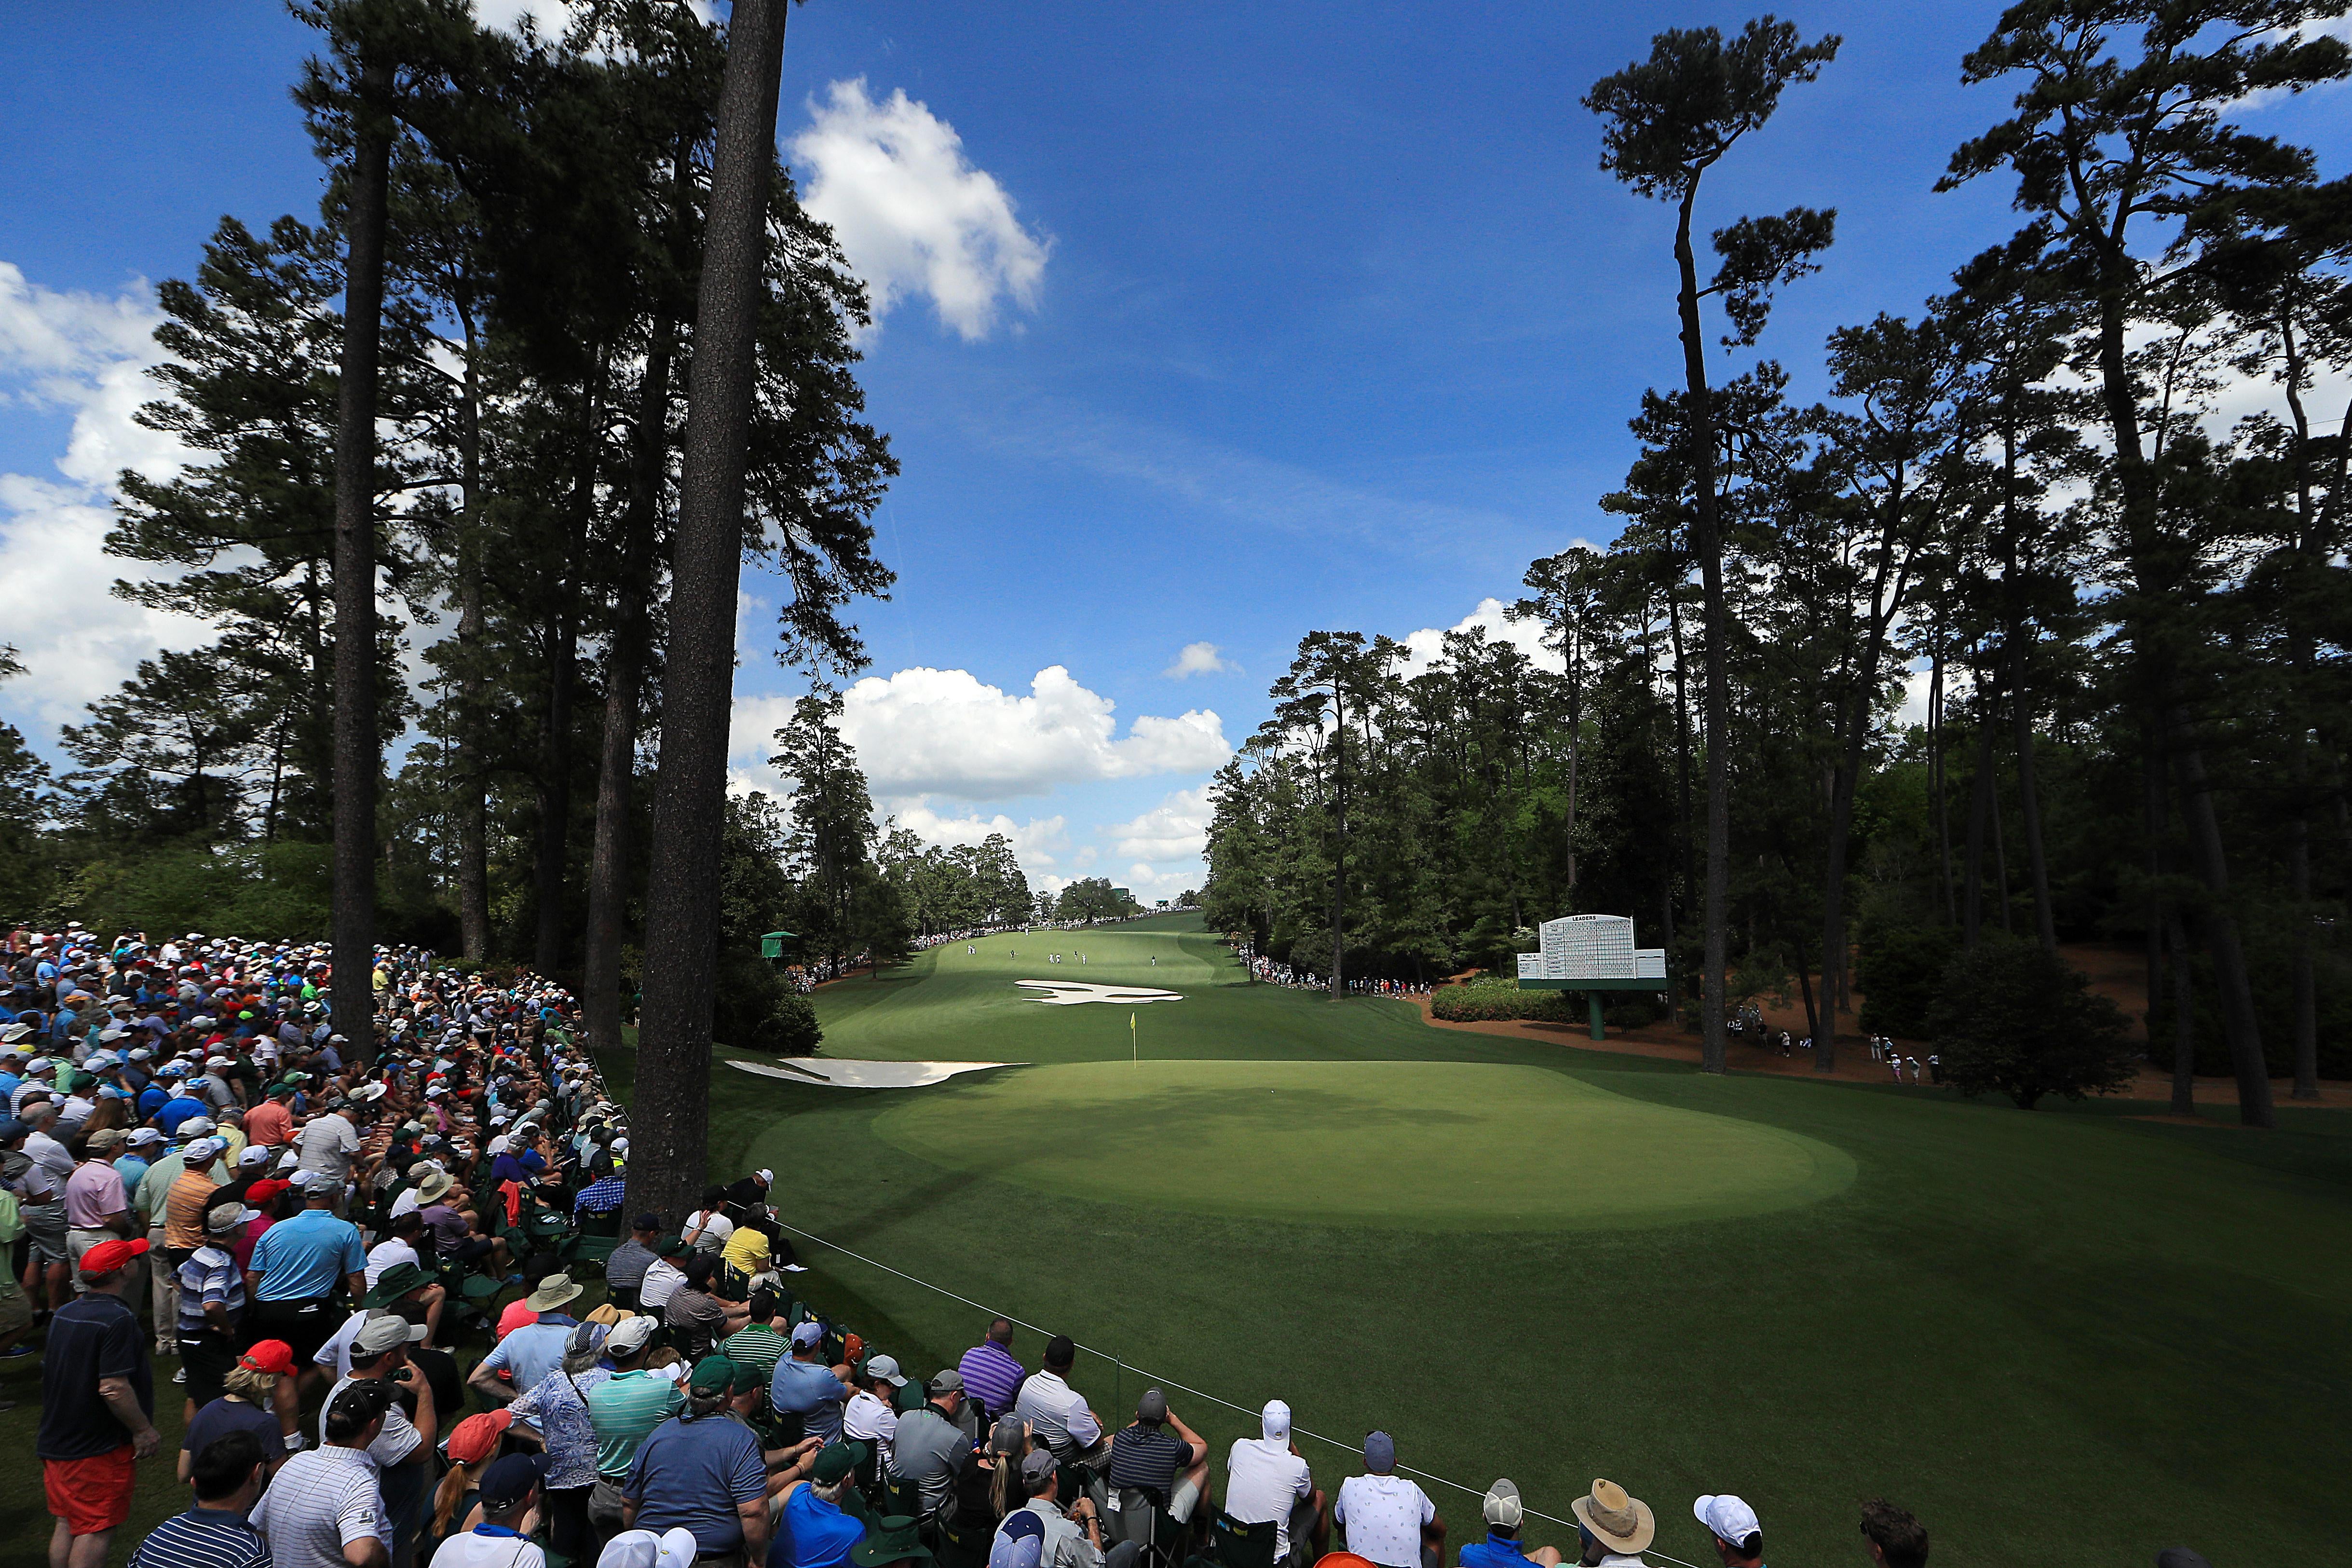 AUGUSTA, GEORGIA - APRIL 11: A general view of the tenth green during the first round of the Masters at Augusta National Golf Club on April 11, 2019 in Augusta, Georgia. (Photo by Mike Ehrmann/Getty Images)